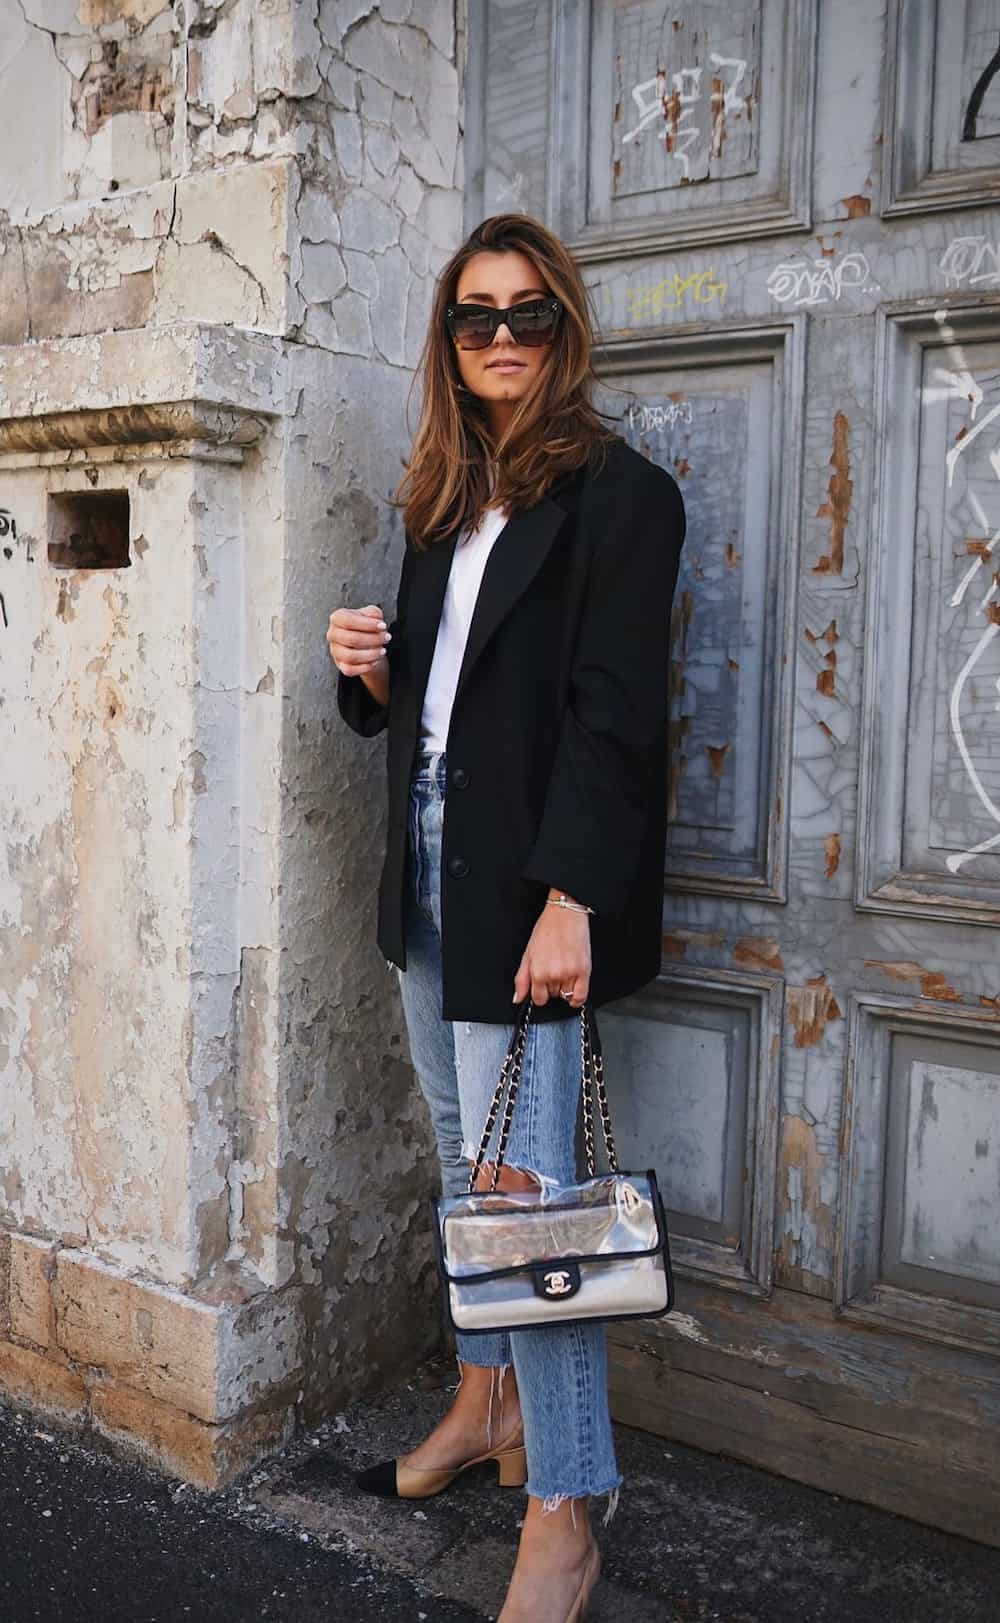 image of a woman in an oversized black blazer, white t-shirt, jeans, and low heels